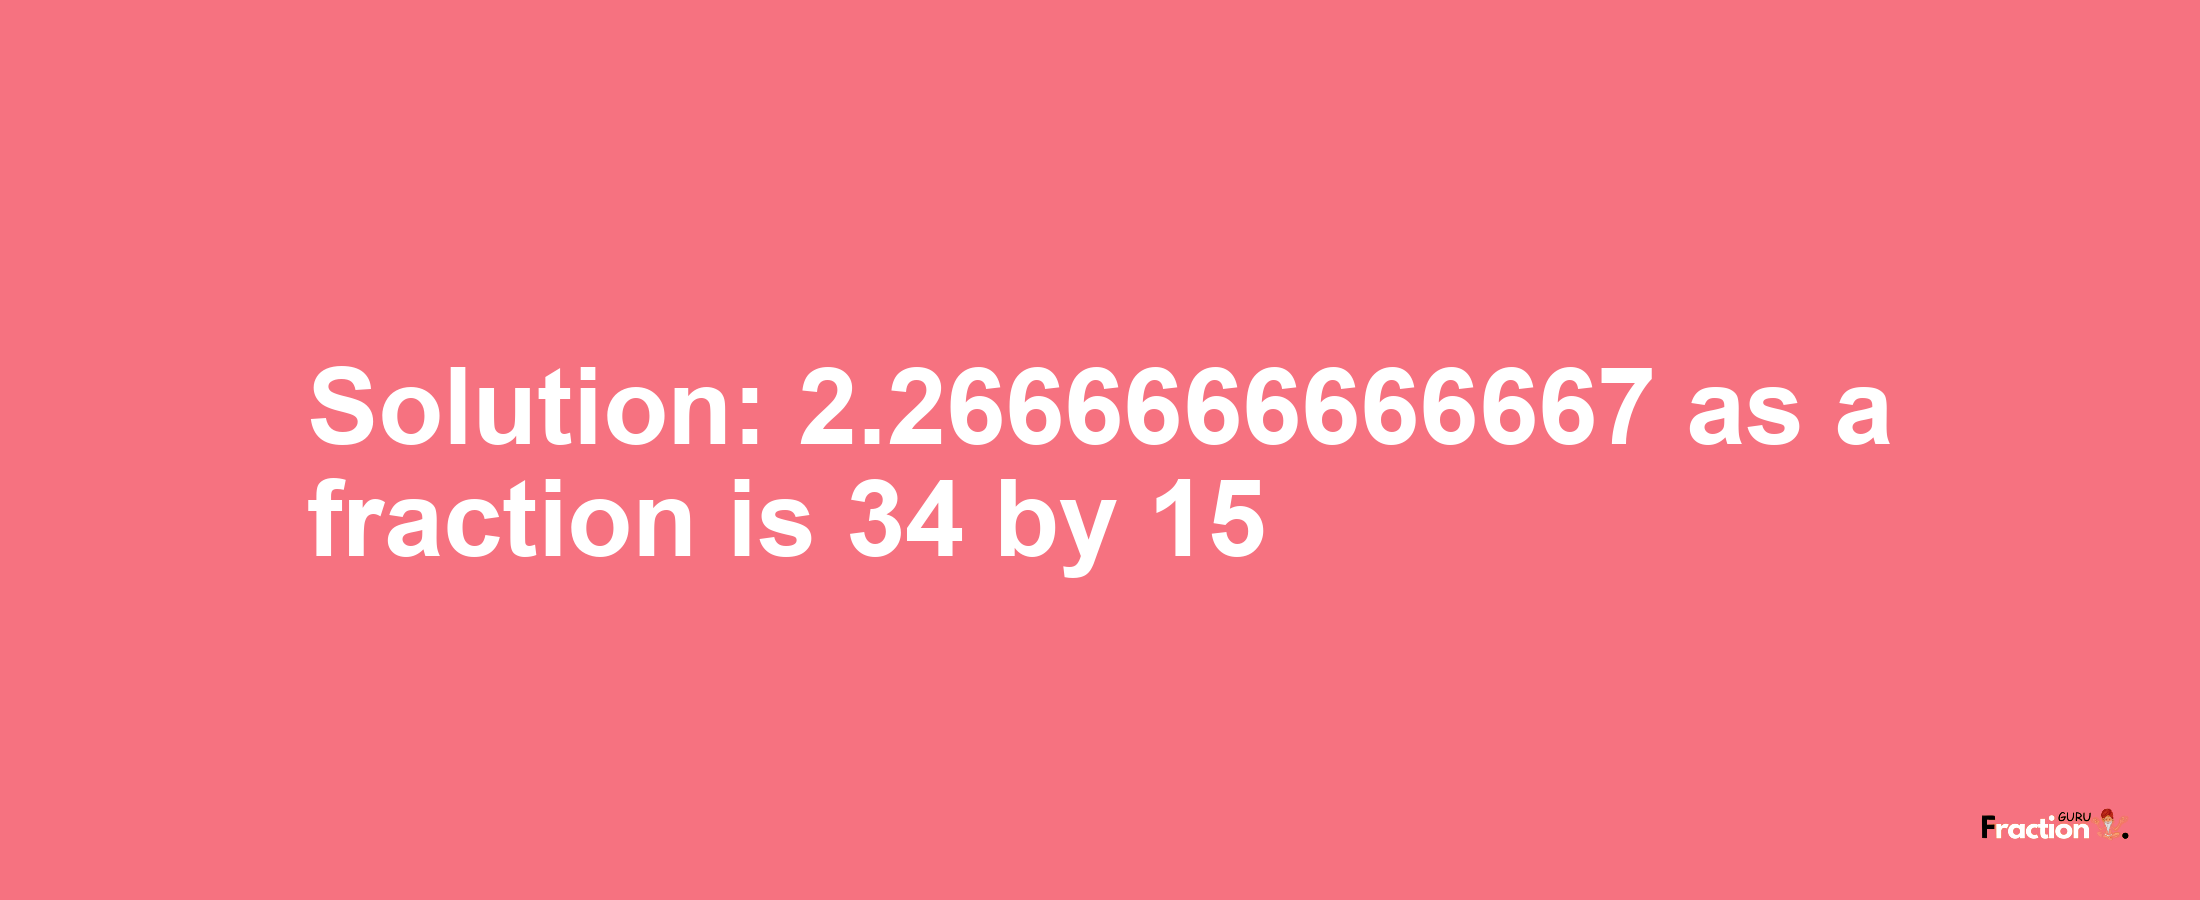 Solution:2.2666666666667 as a fraction is 34/15